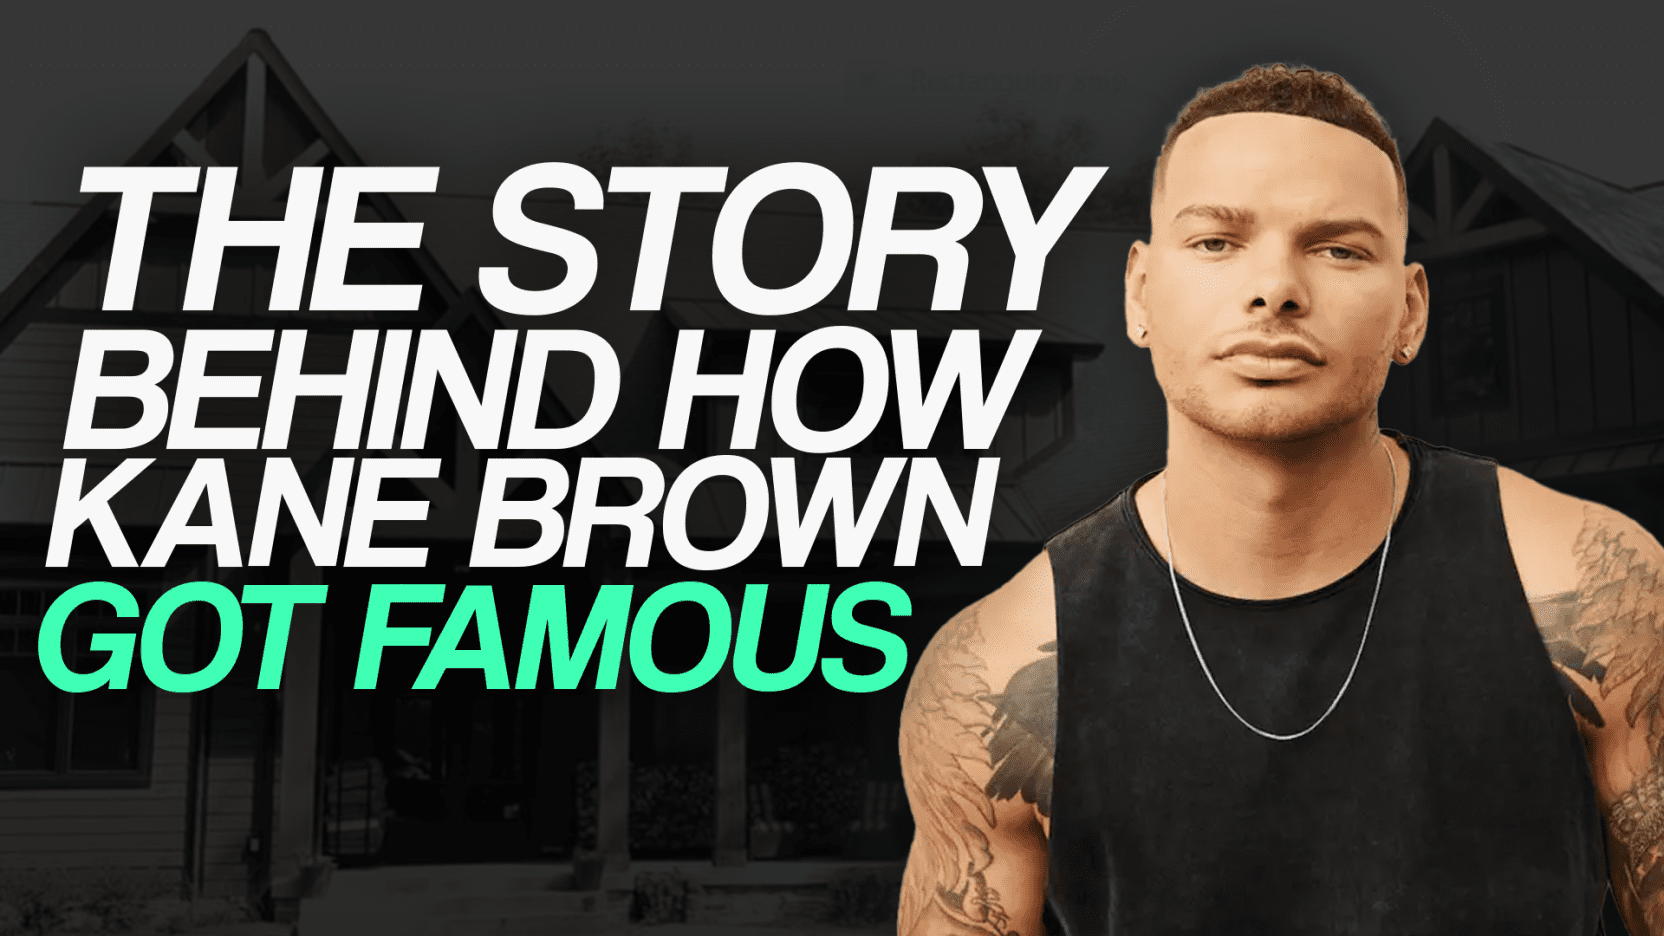 The Untold Story of how Kane Brown Became a Superstar